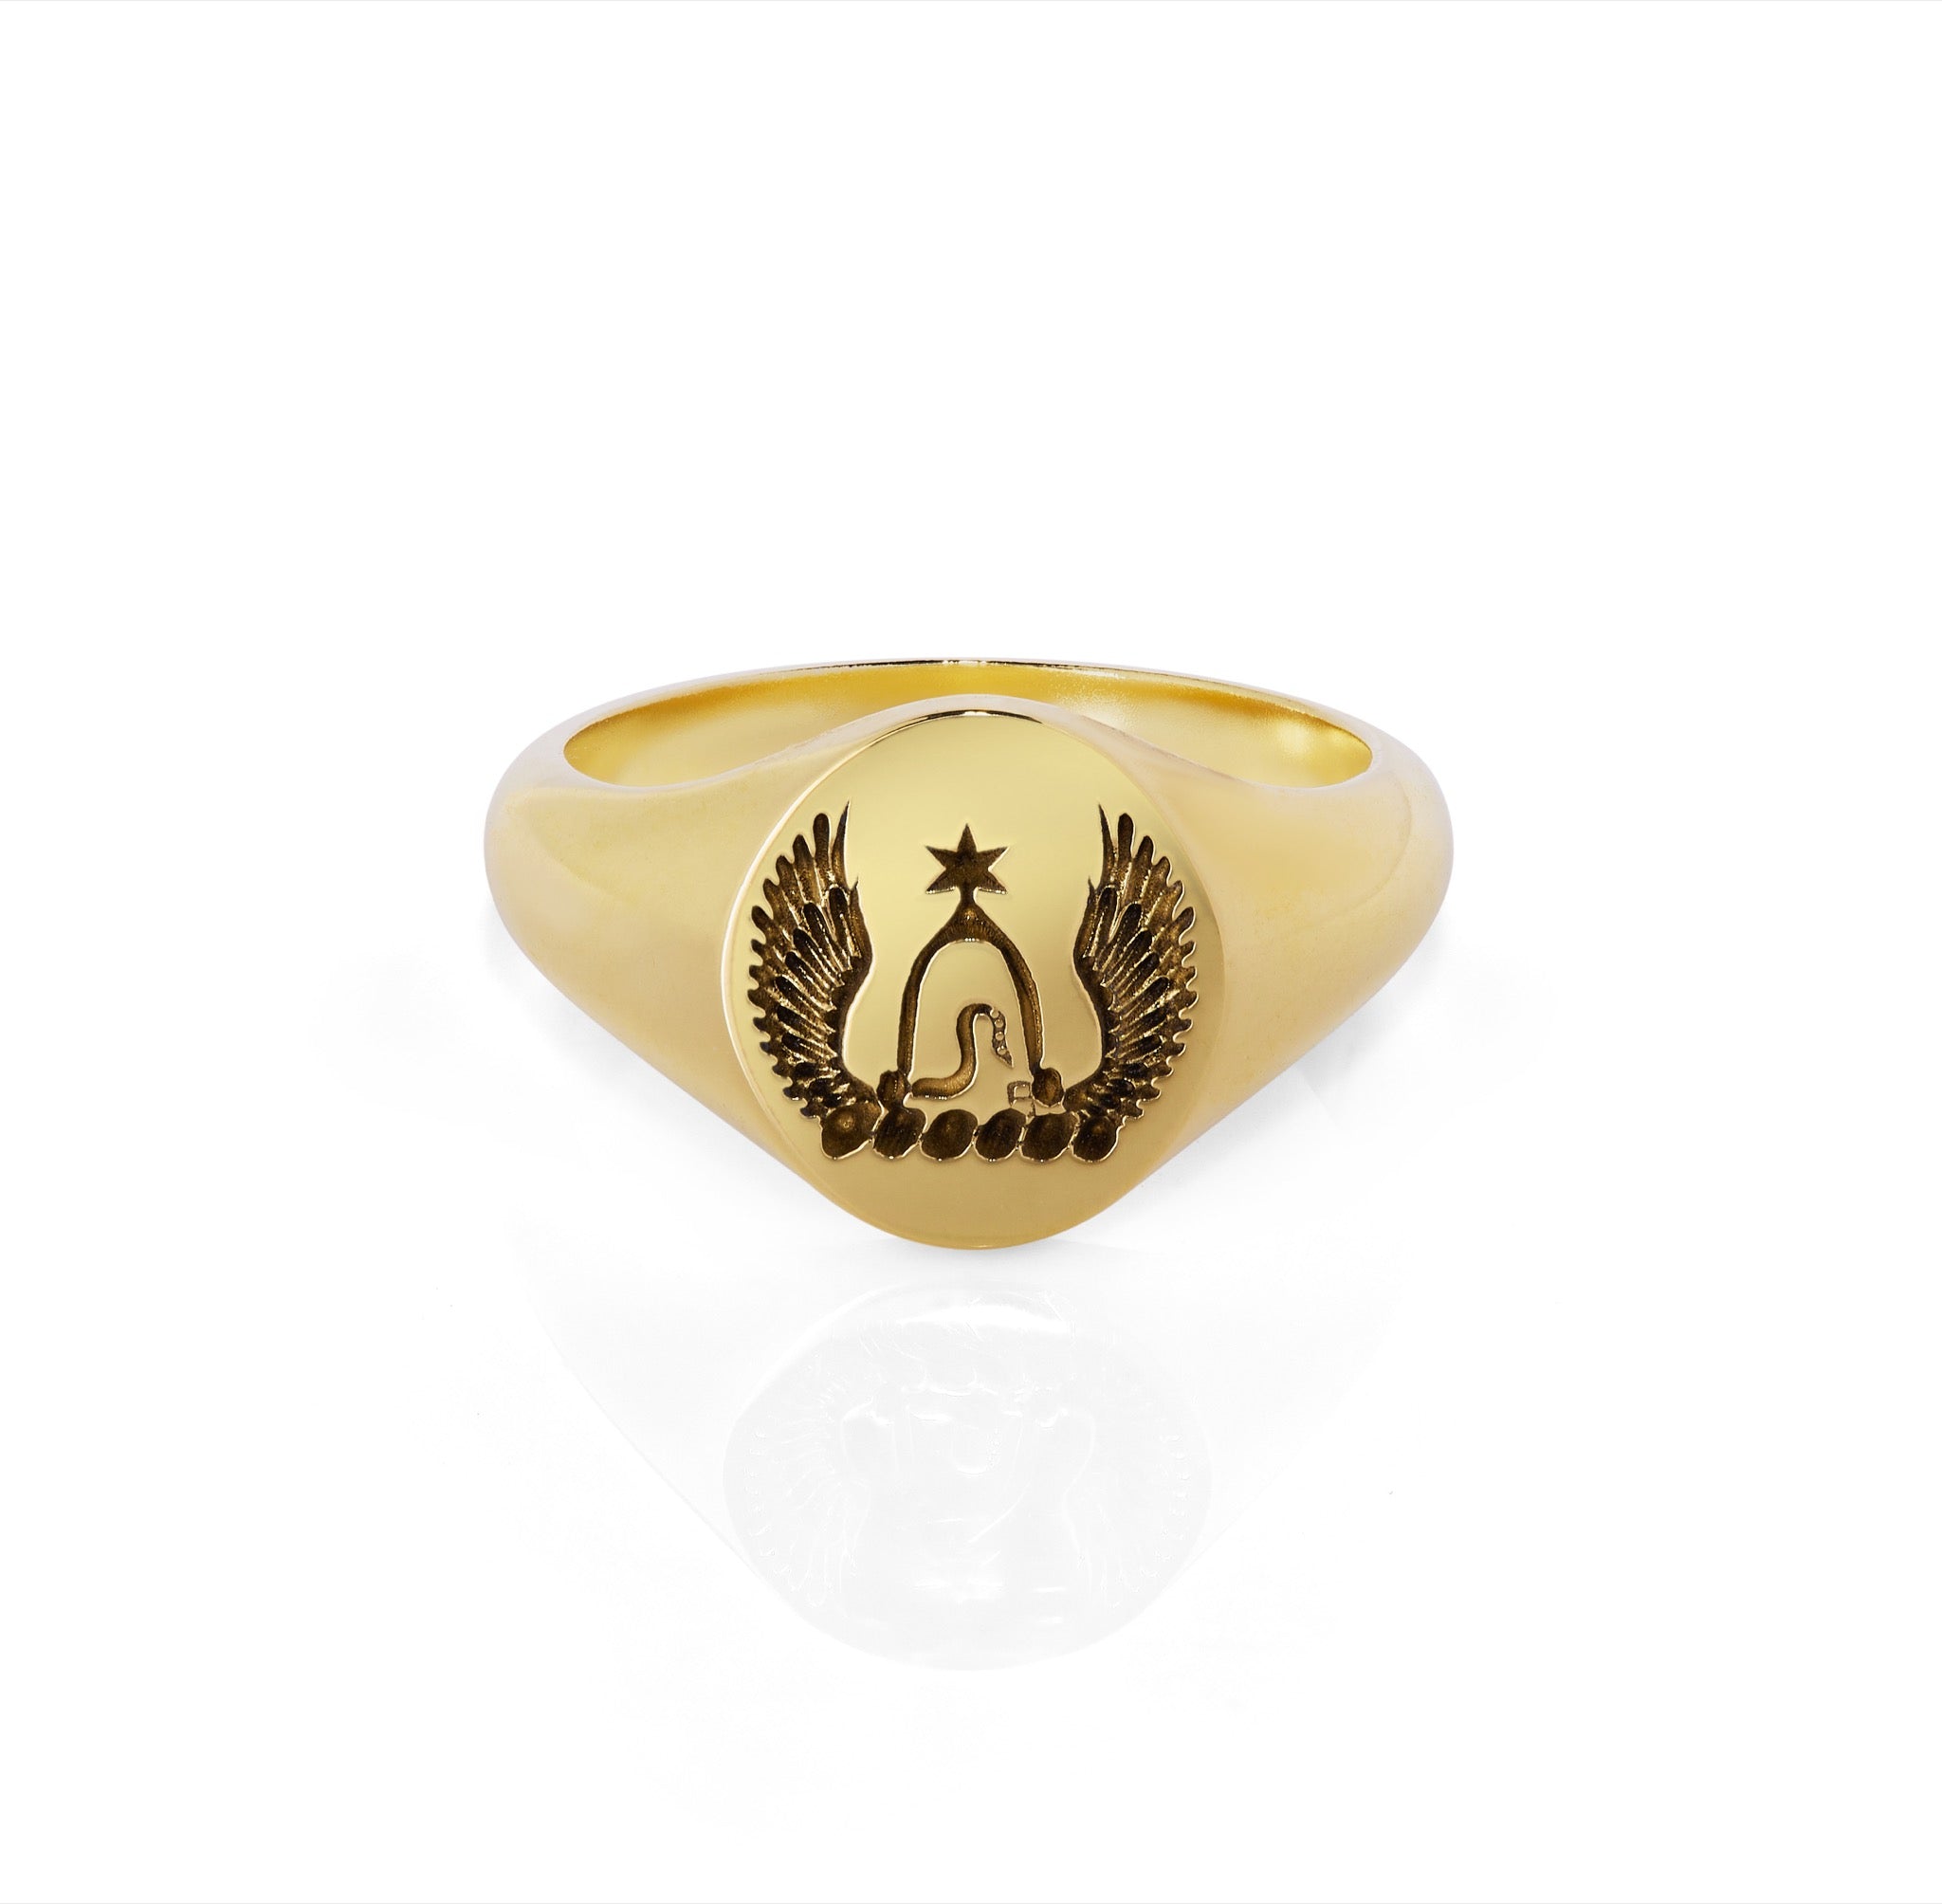 bepsoke pinky signet ring Trilogy yellow diamond ring made from 18ct yellow gold with family crest hand engraved on it, lying on white background with shadow